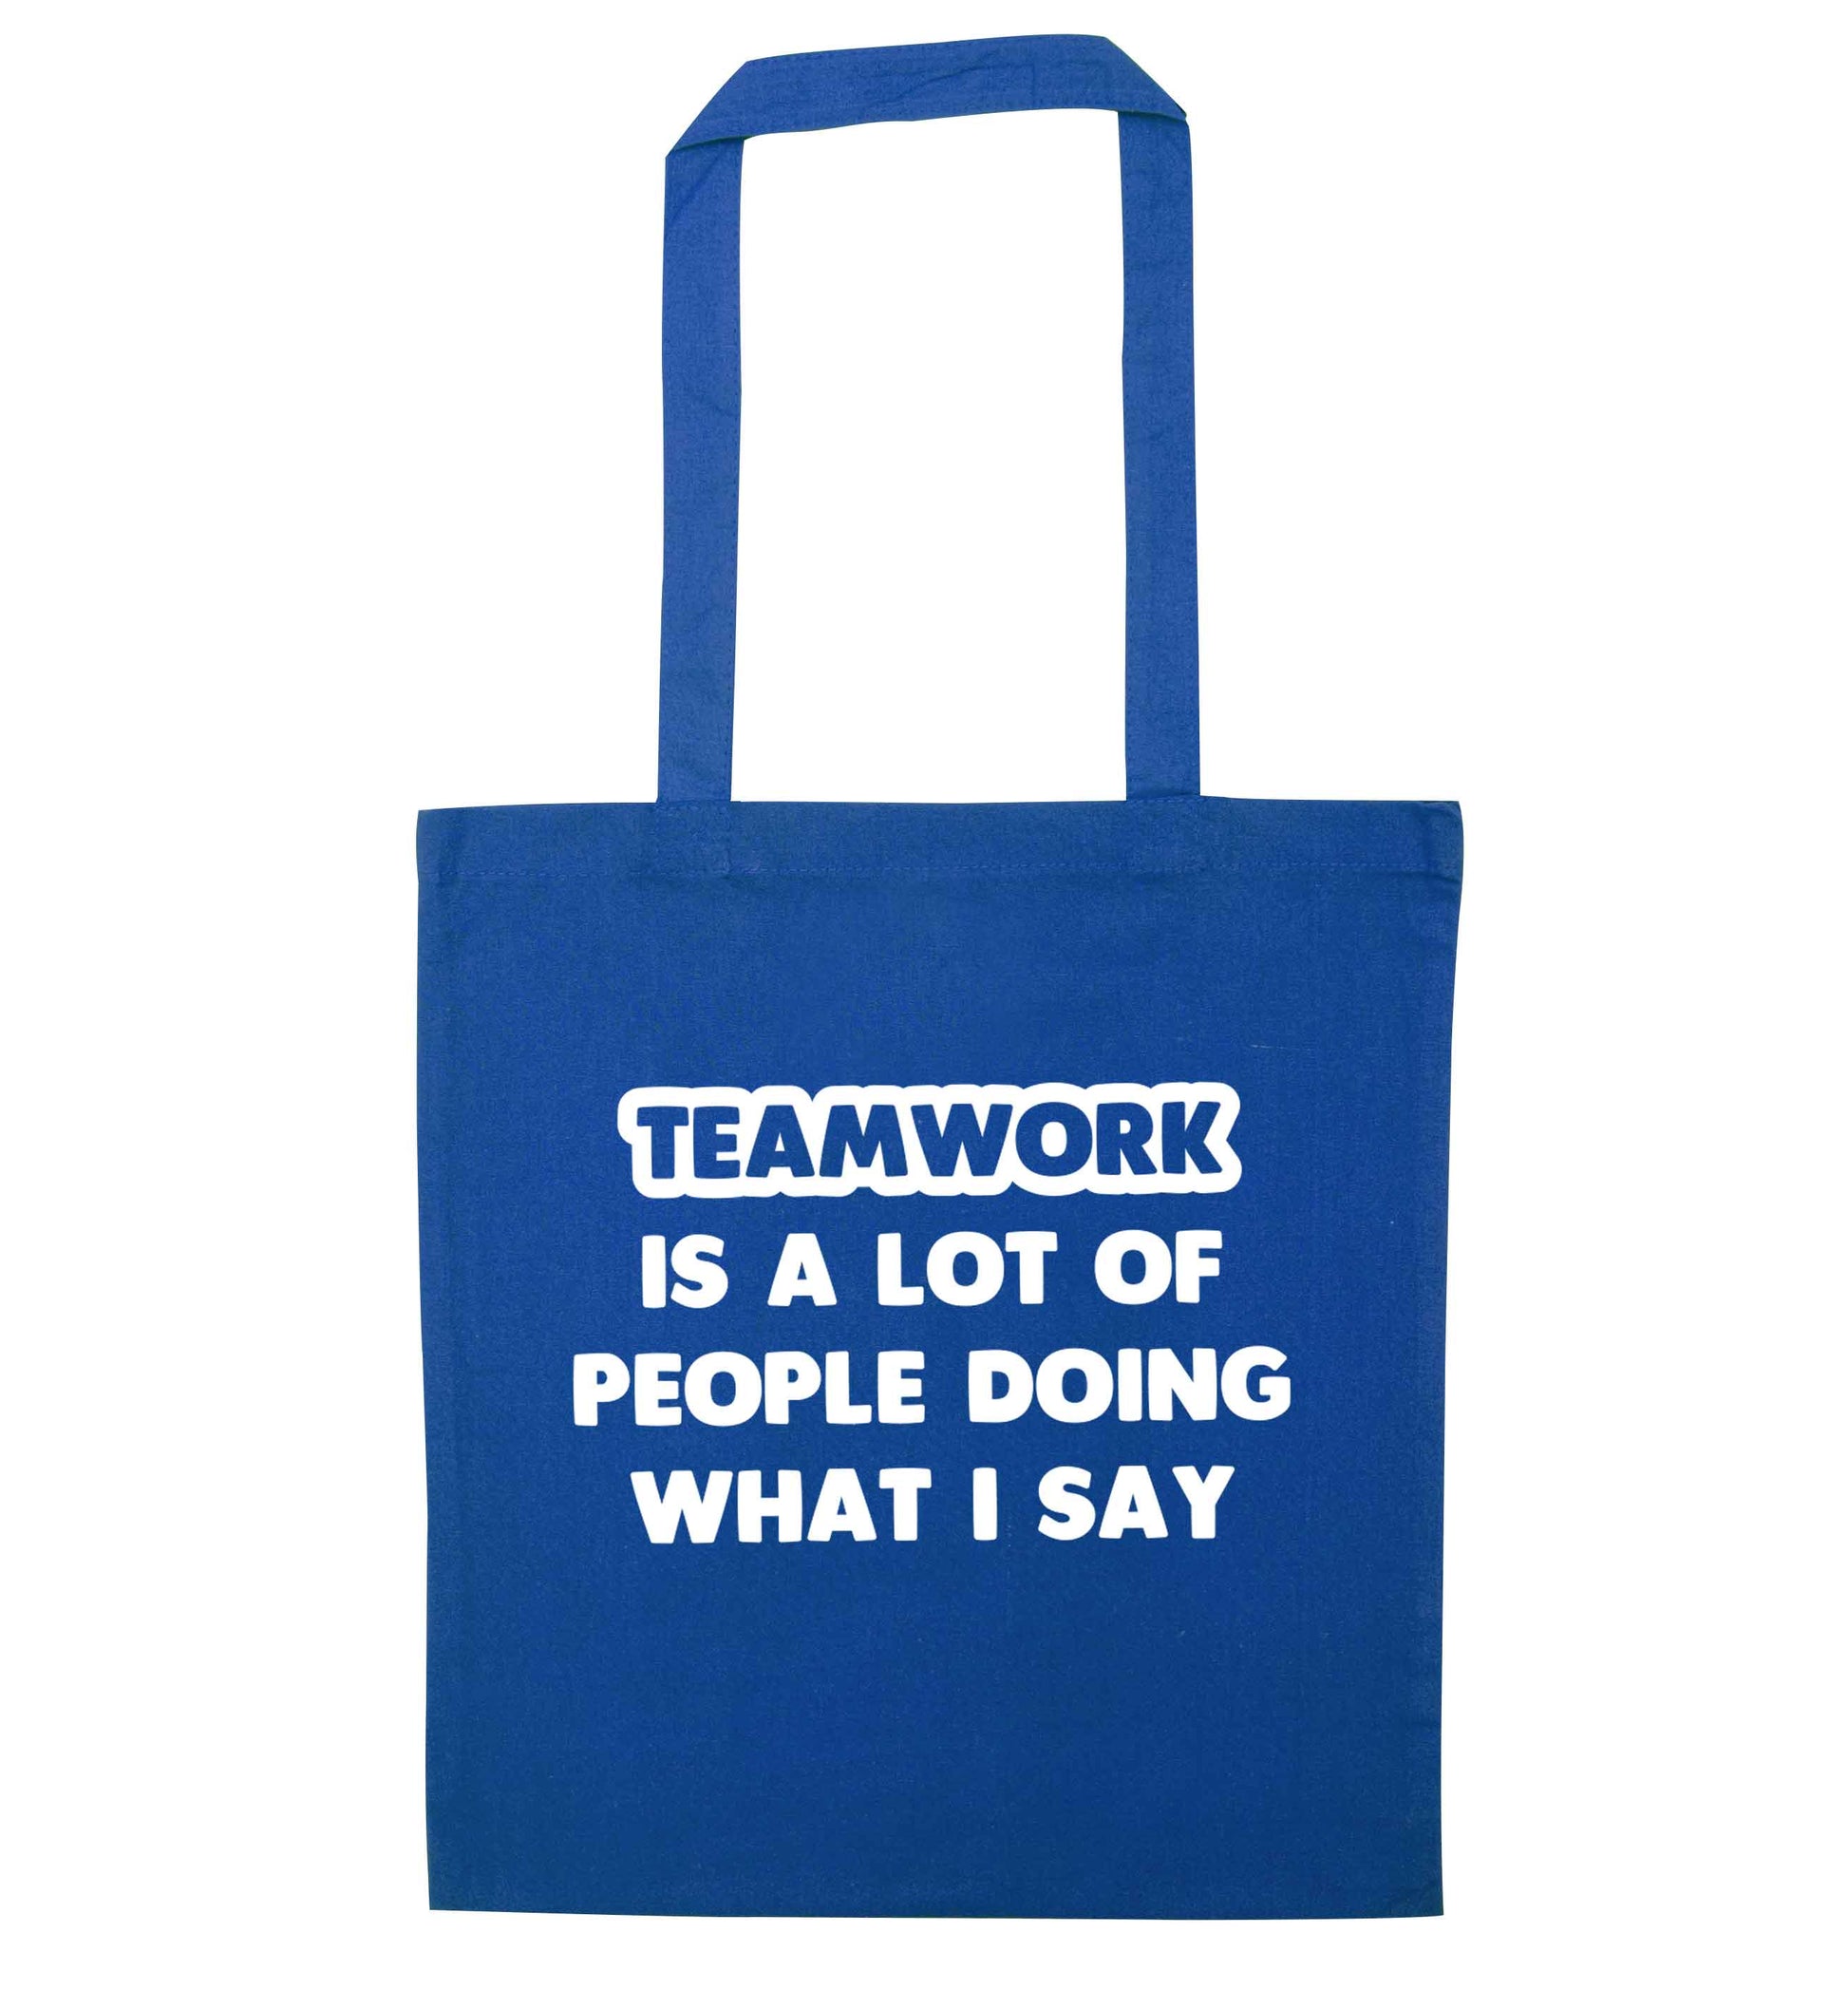 Teamwork is a lot of people doing what I say blue tote bag